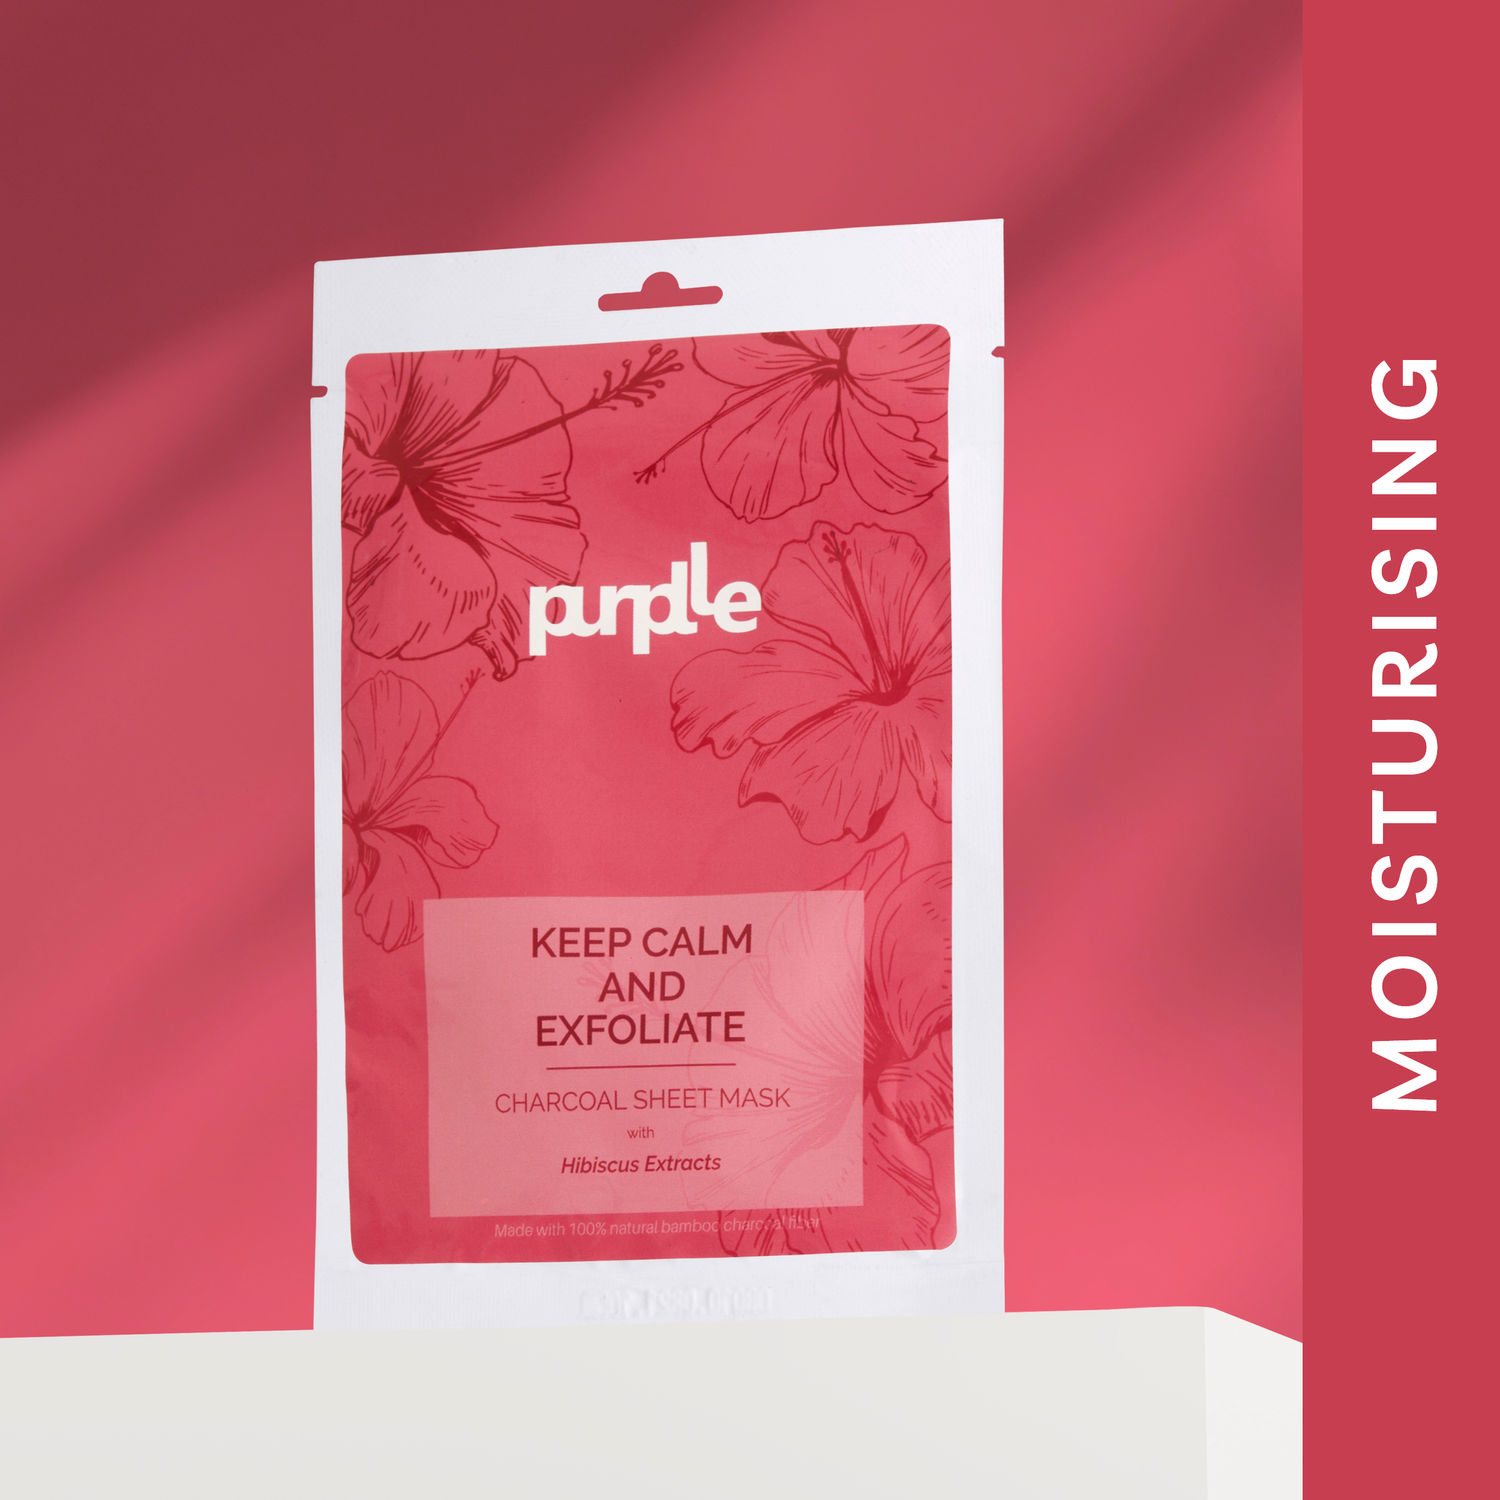 Buy Purplle Exfoliating Charcoal Sheet Mask with Hibiscus Extracts | All Skin Types | Brightening | Boosts Collagen | Moisturising | Anti-acne (20 ml) - Purplle